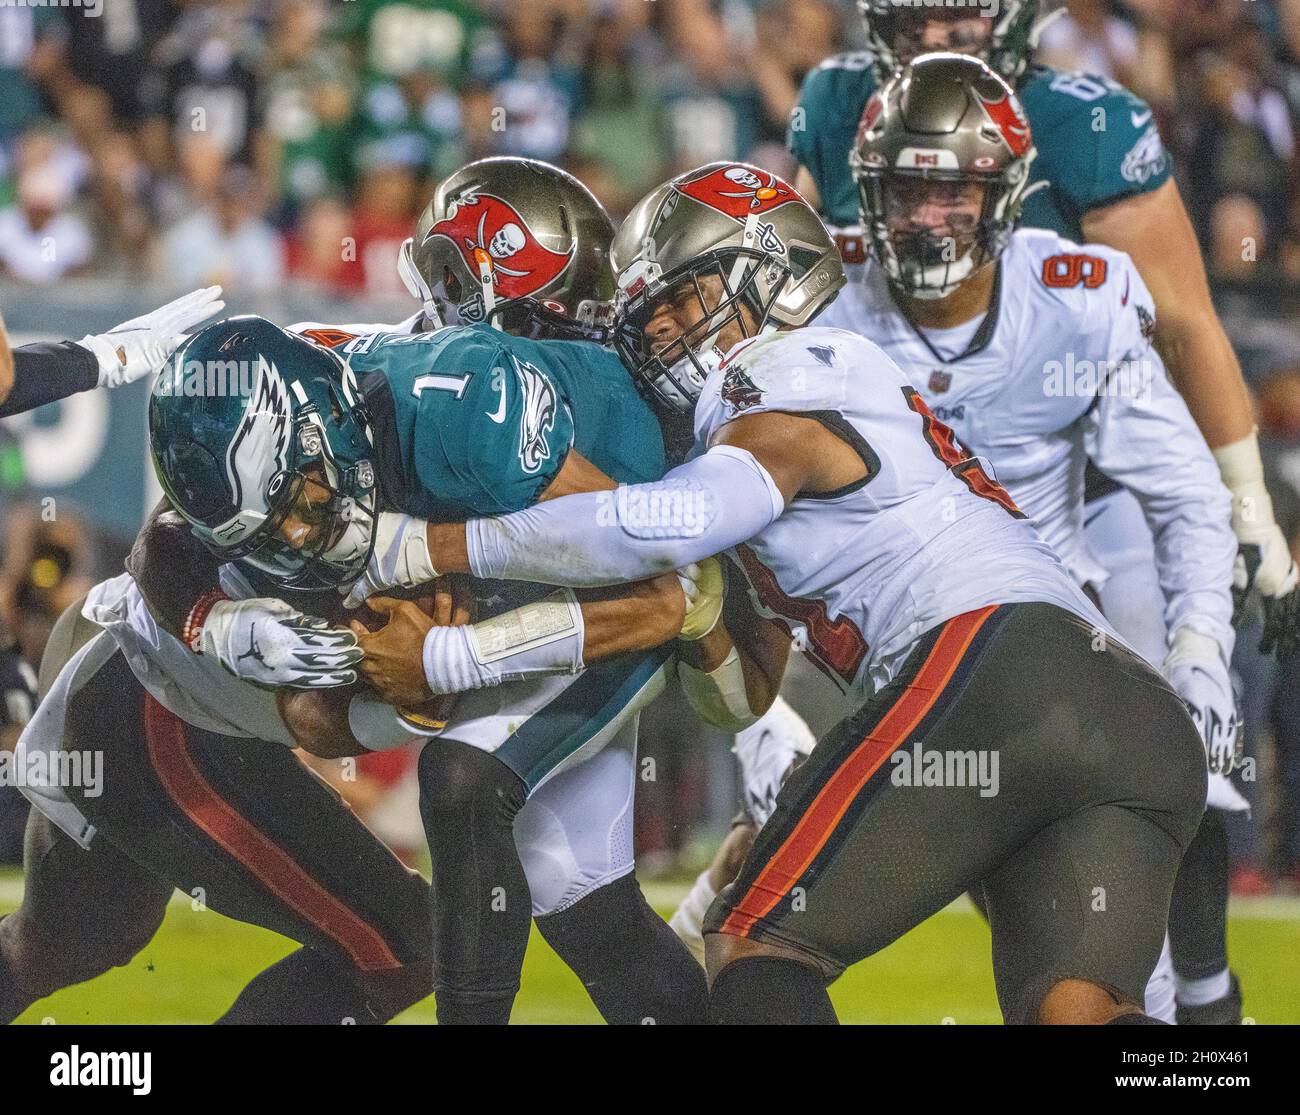 Philadelphia, Pennsylvania, USA. 14th Oct, 2021. Eagles quarterback JALEN HURTS, #1, breaks free of Tampa Bay linebacker KEVIN MINTER, #51, to score a touchdown during an NFL football game between the Philadelphia Eagles and the Tampa Bay Buccaneers at Lincoln Financial Field in Philadelphia, Pennsylvania. Tampa Bay won 28-22. (Credit Image: © Jim Z. Rider/ZUMA Press Wire) Stock Photo